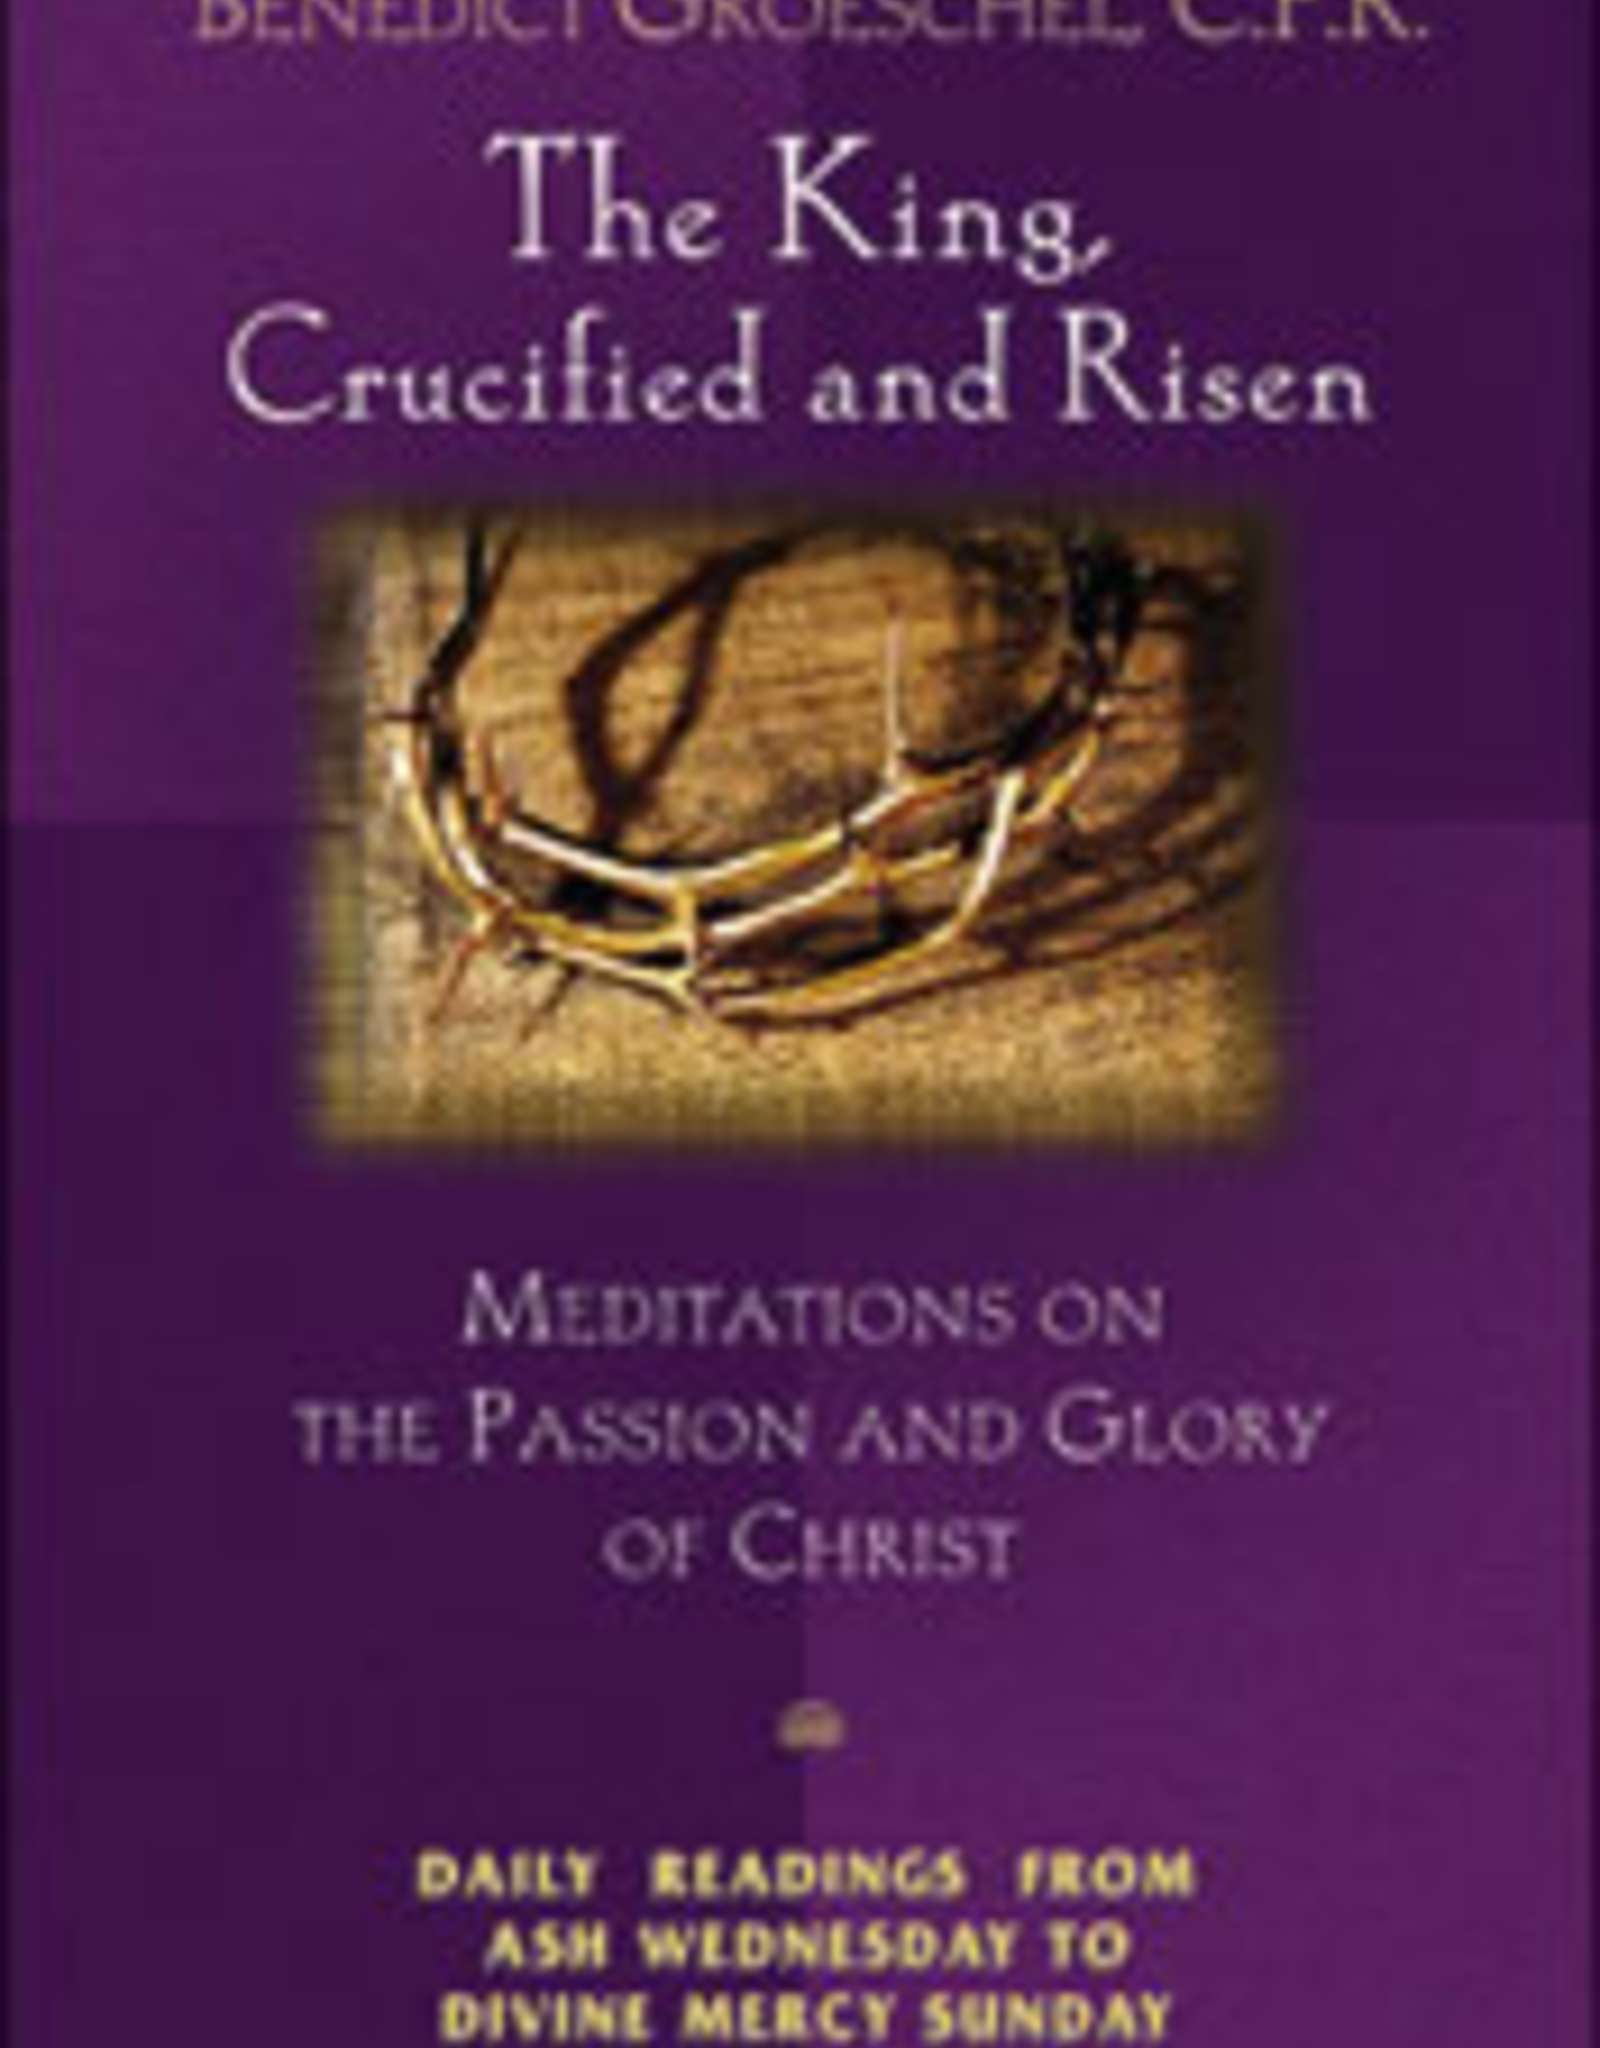 Franciscan Media The King, Crucified and Risen:  Meditations on the Passion and Gloy of Christ-- Readings from Ash Wednesday to Divine Mercy Sunday, by Benedict Groeschel, CFR